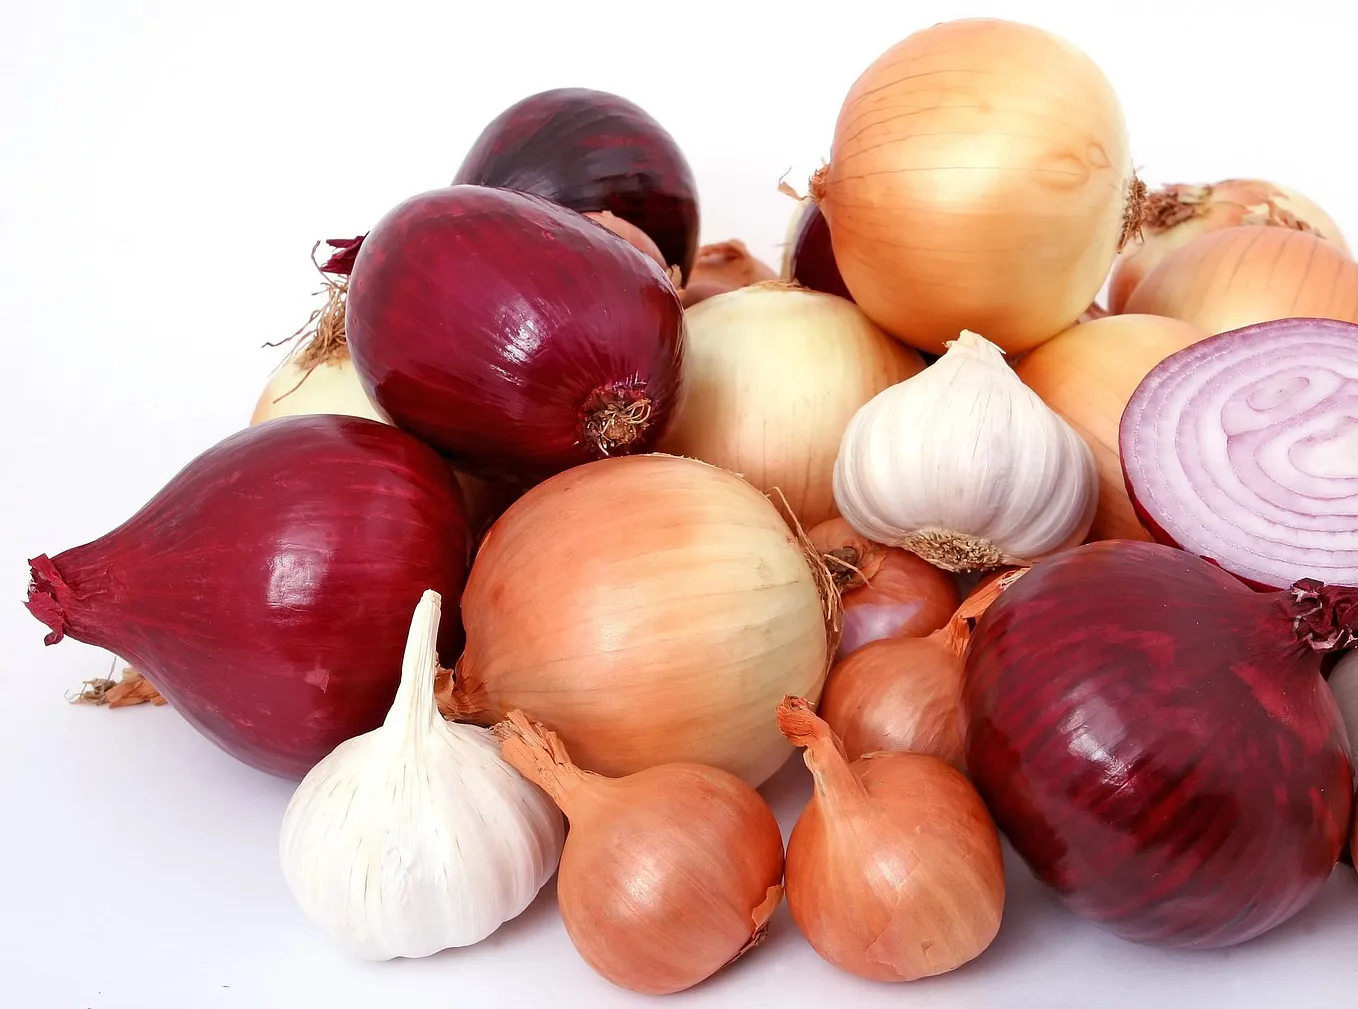 Exploring Onions: Why Most Recipes Instruct Us to “Chop One Onion”